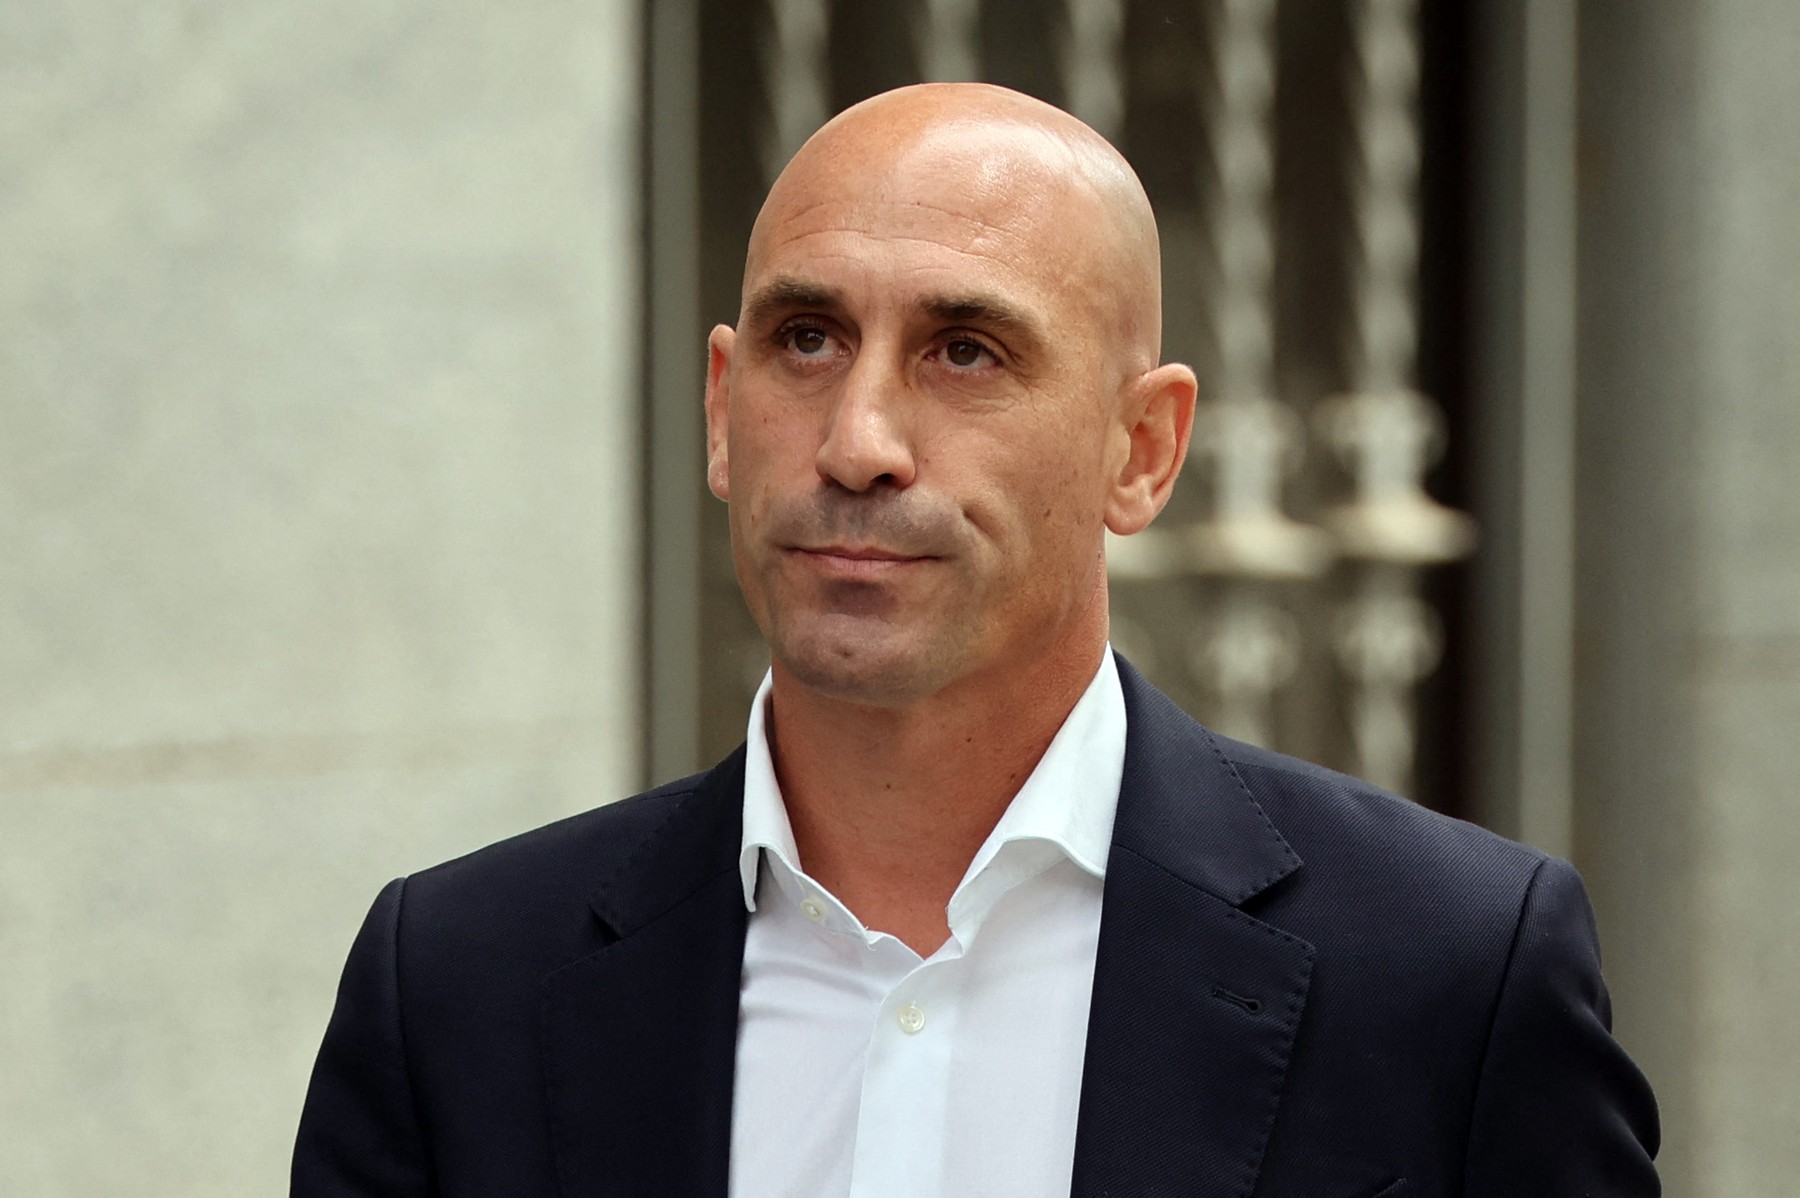 Former president of the Spanish football federation Luis Rubiales leaves the Audiencia Nacional court in Madrid on September 15, 2023. Five days after resigning as Spain's football chief, Luis Rubiales was due in court today on sexual assault charges over forcibly kissing women's World Cup player Jenni Hermoso. The 46-year-old has been summoned to Madrid's Audiencia Nacional court at midday (1000 GMT) where he will appear before Judge Francisco de Jorge who is heading up the investigation.,Image: 805413187, License: Rights-managed, Restrictions: , Model Release: no, Credit line: Thomas COEX / AFP / Profimedia